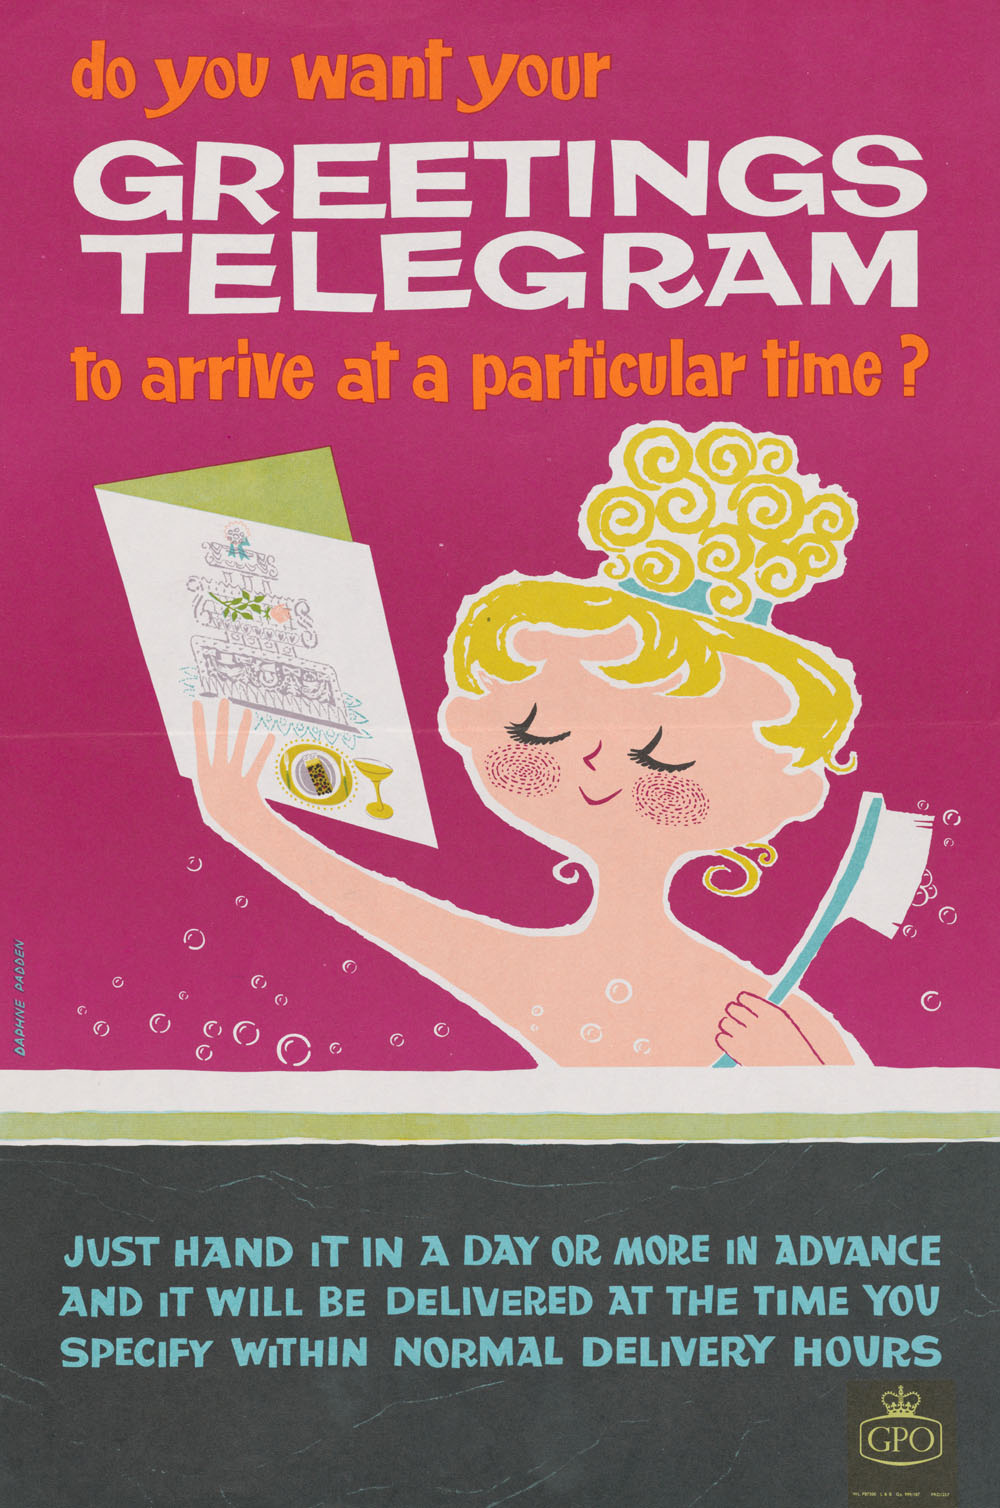 Do you want your greetings telegram to arrive at a particular time?